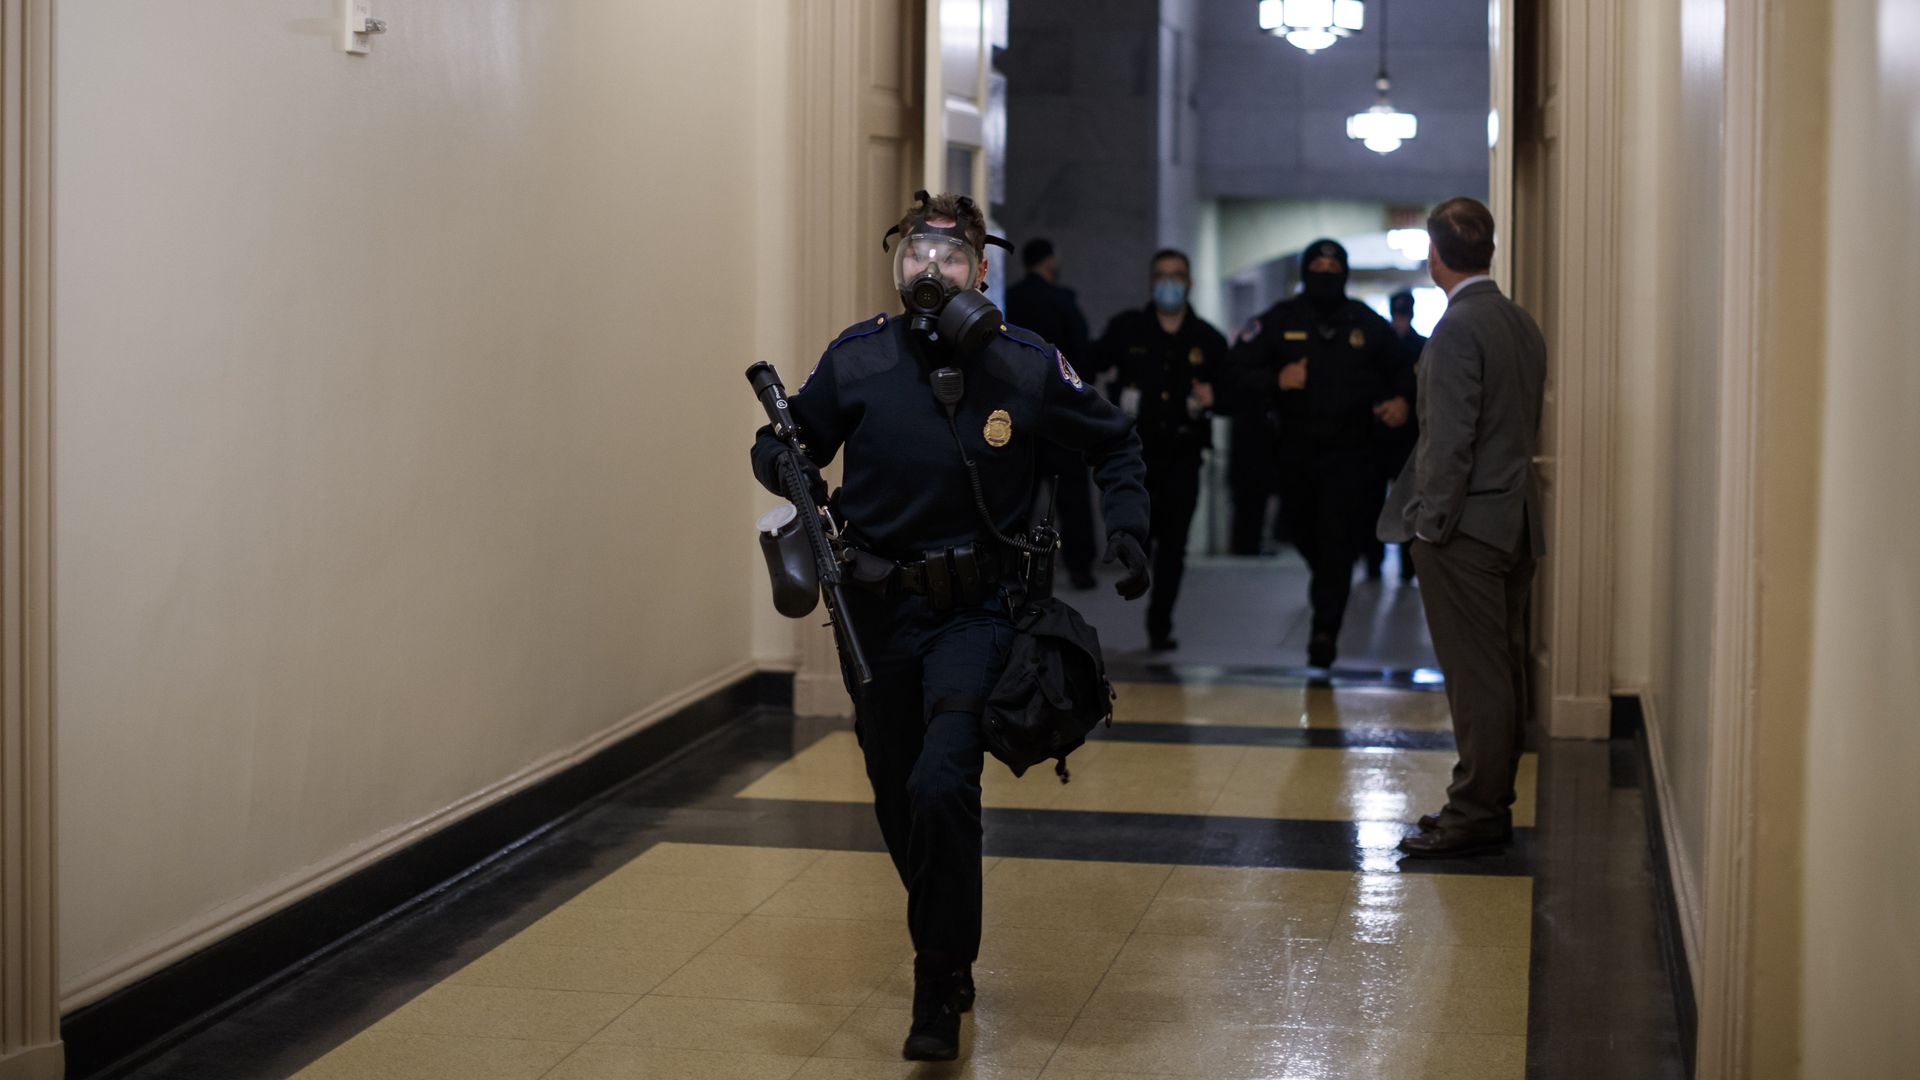 Members of the U.S. Capitol Police rush to respond to rioters on Jan. 6, 2021.